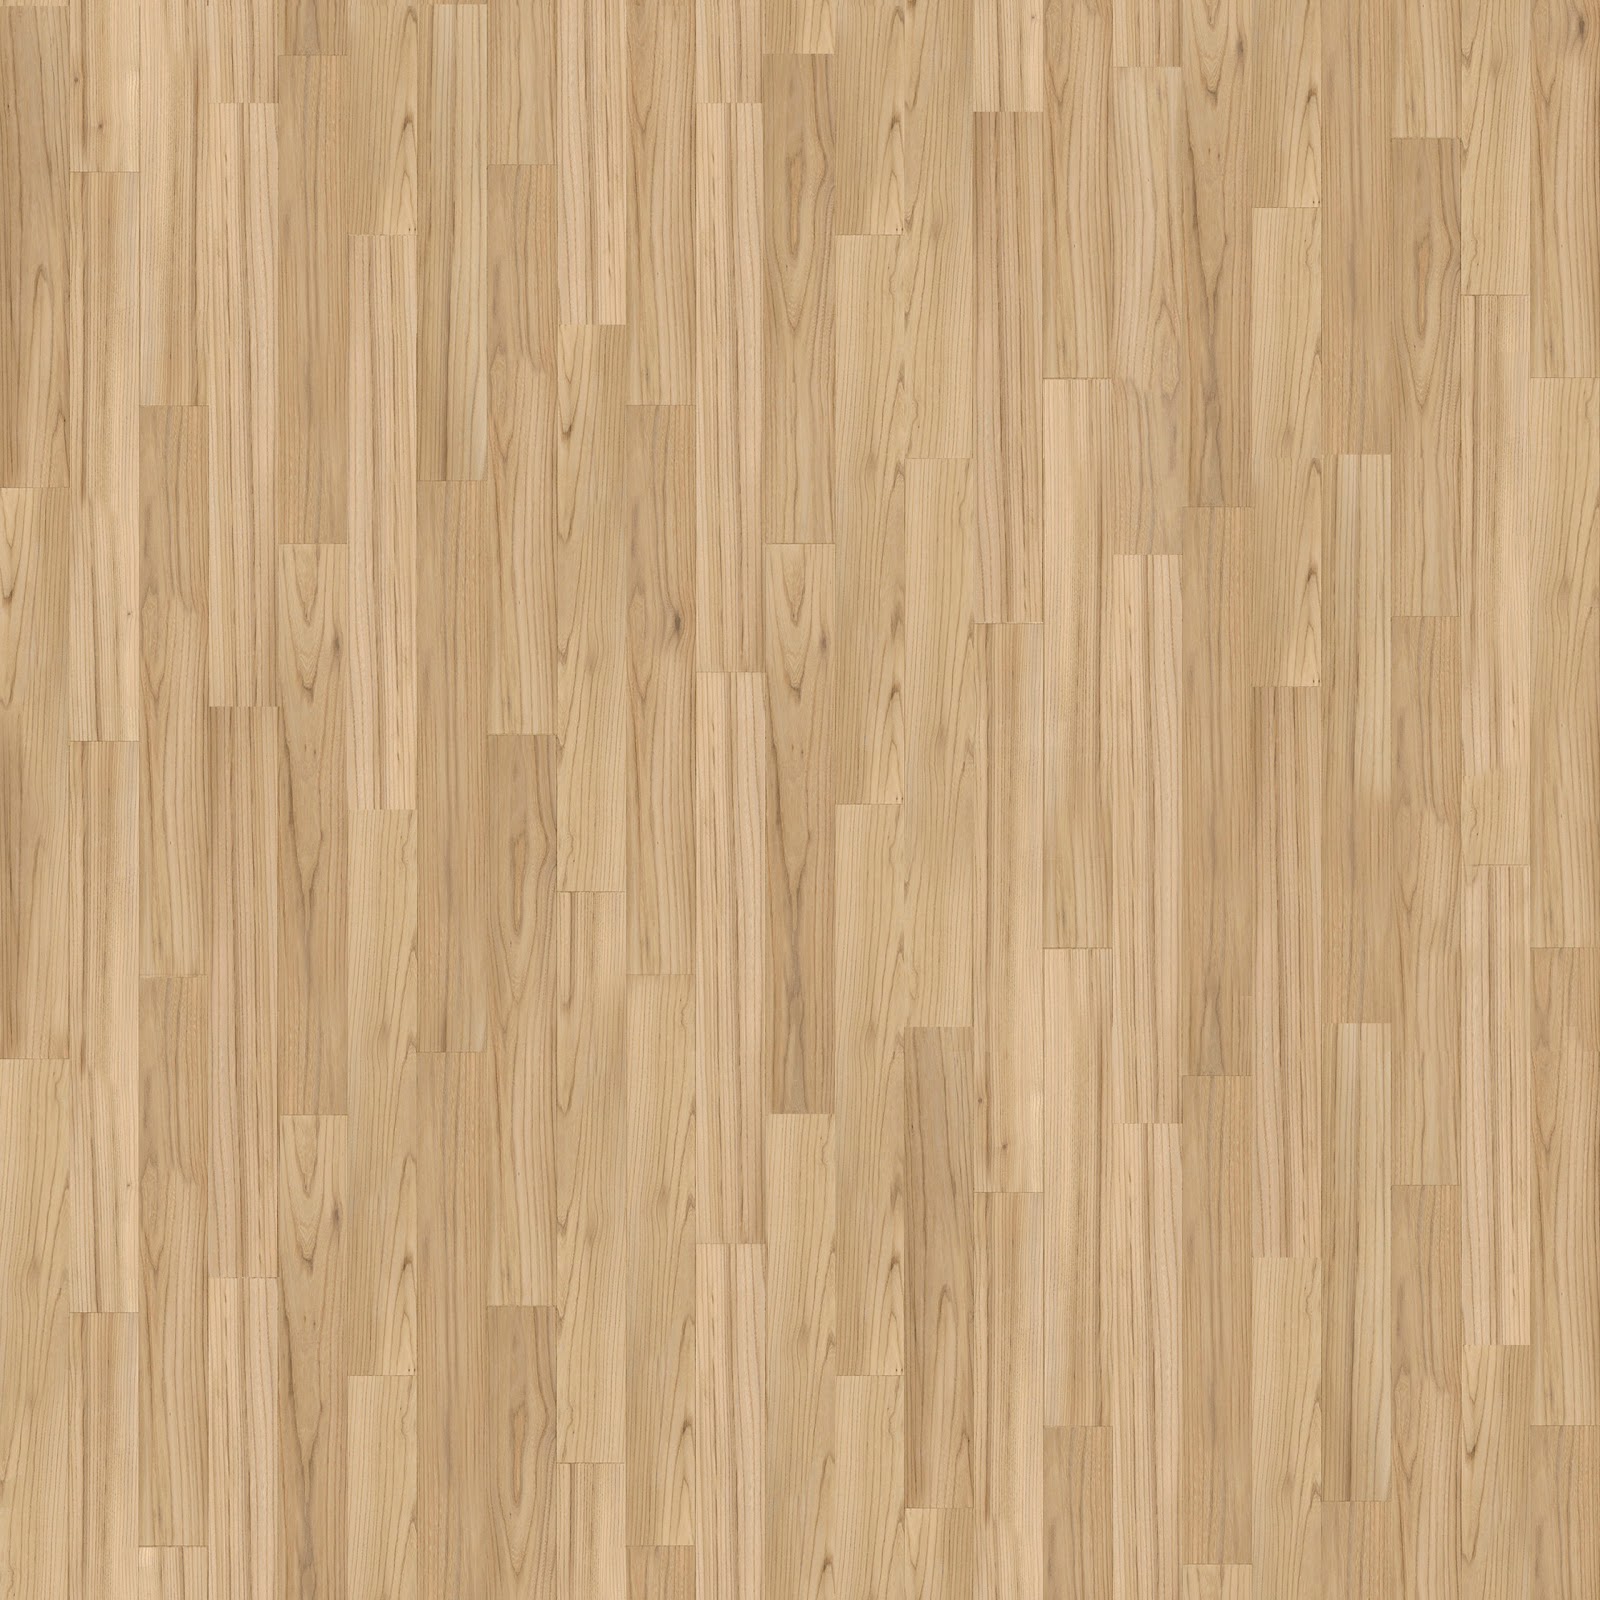 Texturise Free Seamless Tileable Textures And Maps Textures With Bump Specular And Displacement Maps For 3ds Max Animation Video Ga Wood Texture Texture Wood